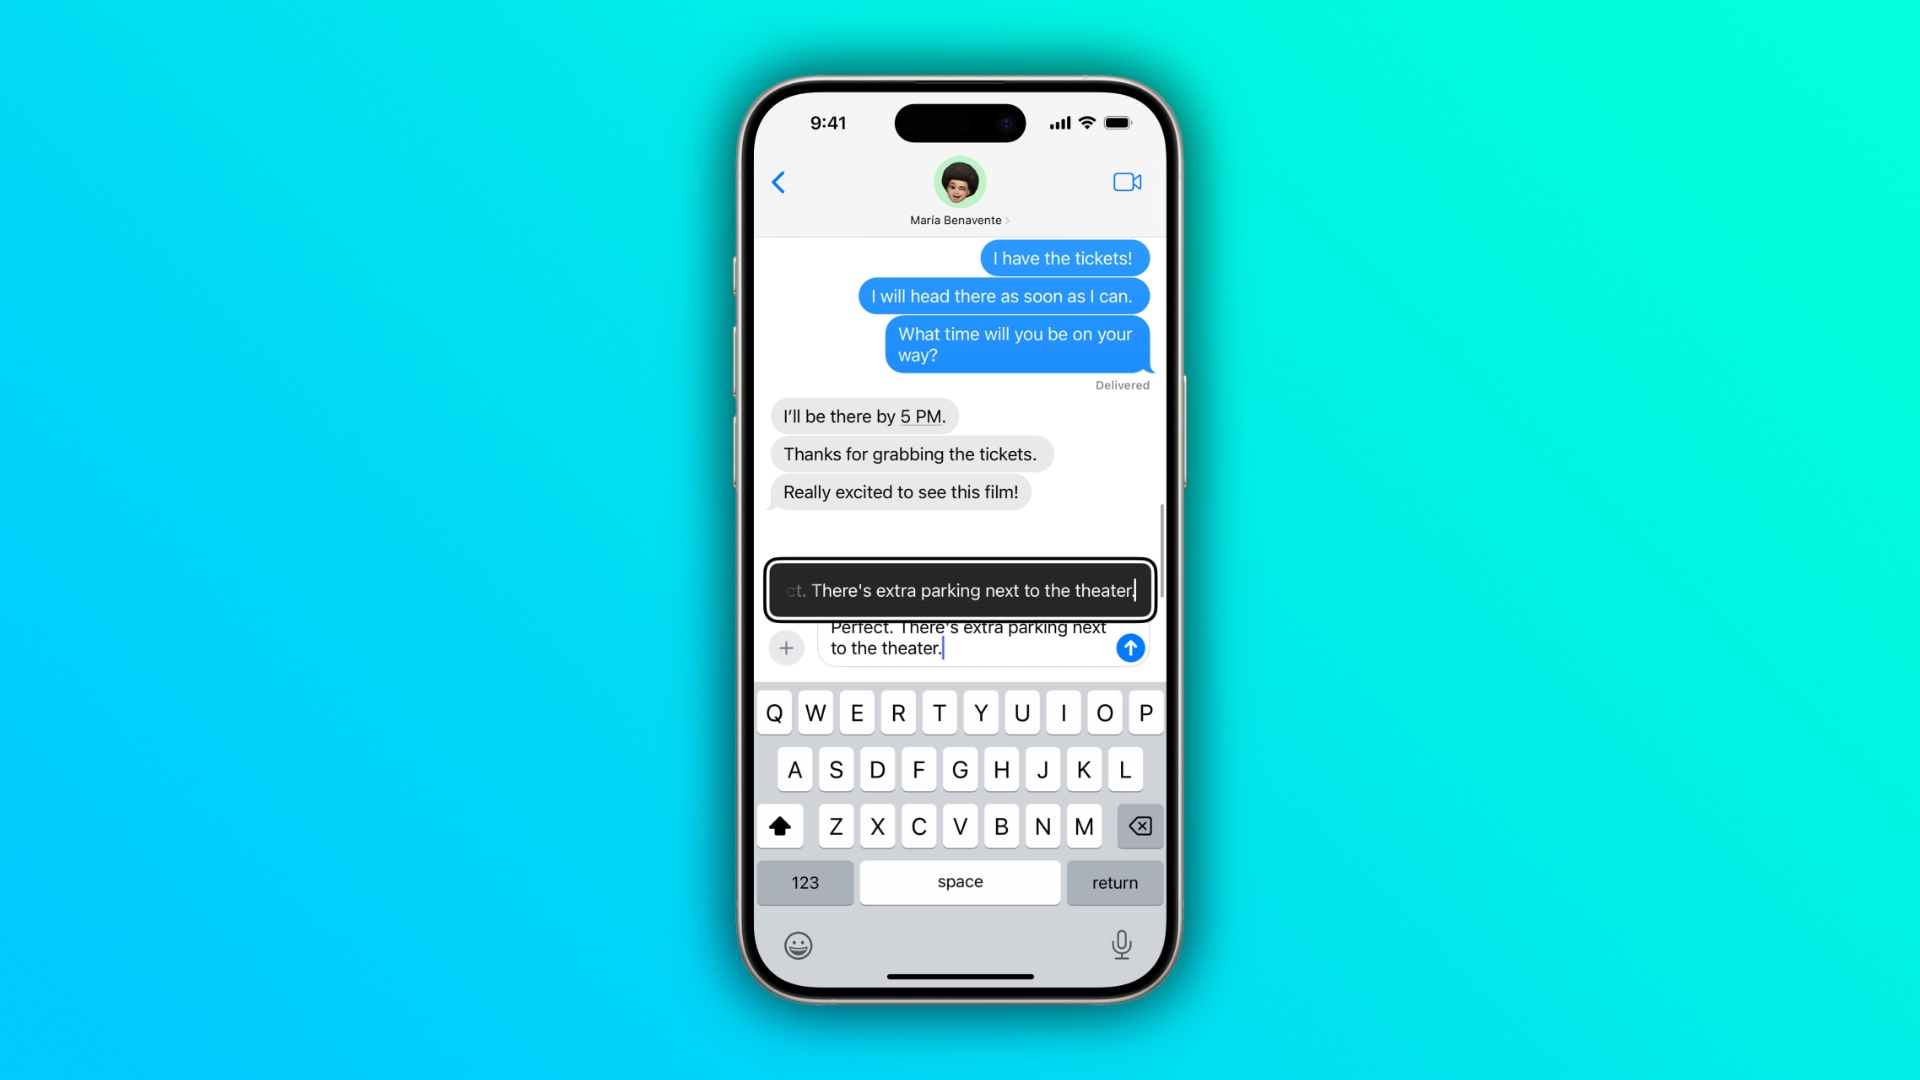 iPhone running Messages app with the Hover Typing accessibility feature enlarging text above the entry field, set against a light blue and green colorful gradient background